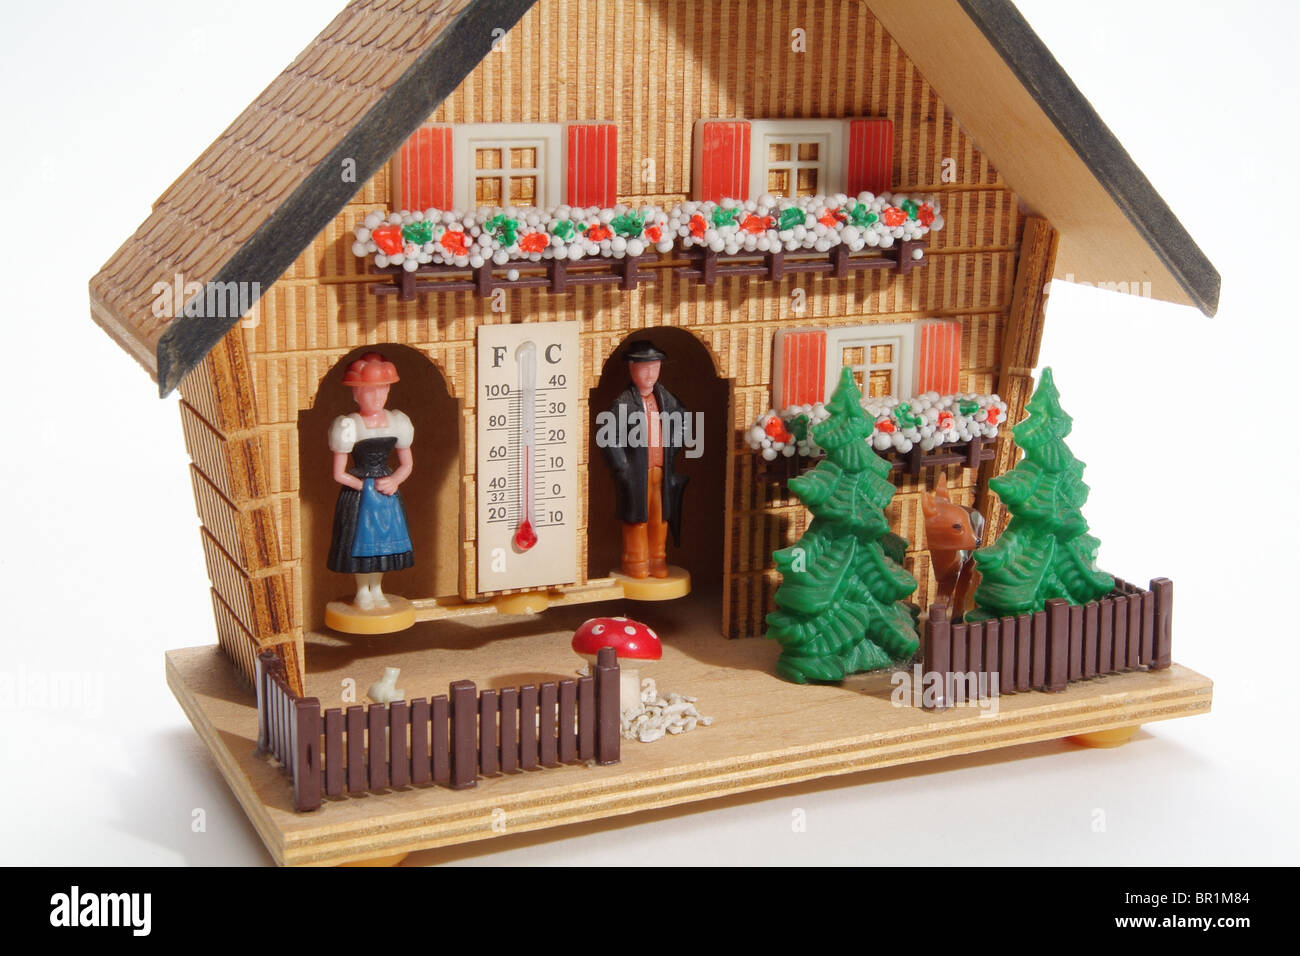 A wooden house with a built-in thermometer, forecasting weather, Hamburg, Germany Stock Photo